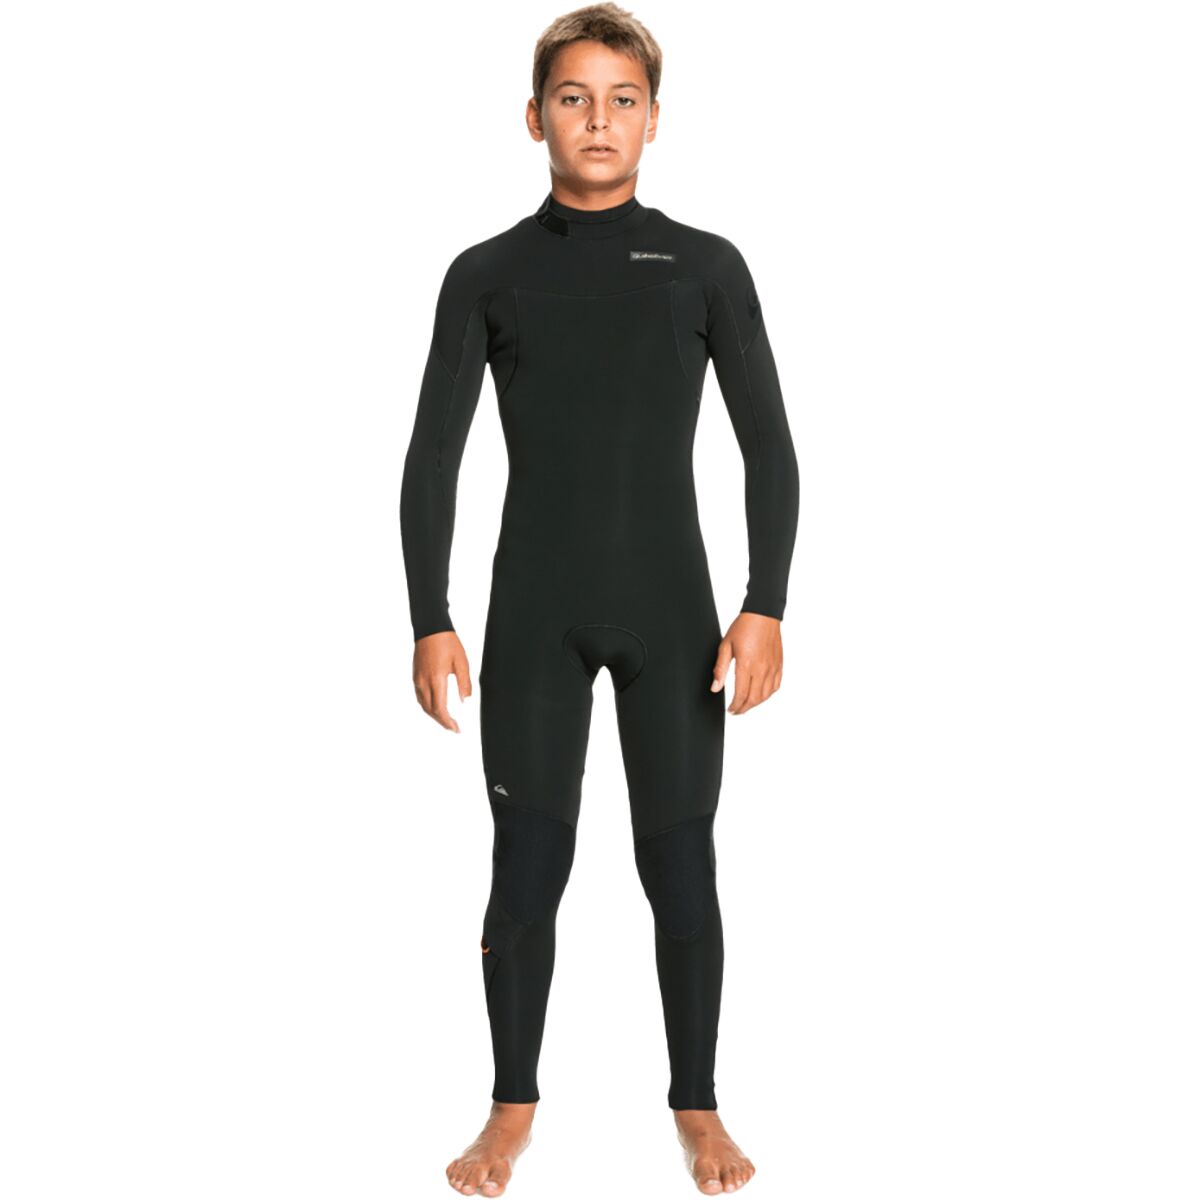 Quiksilver 4/3 Everyday Sessions Back-Zip Wetsuit - Boys'